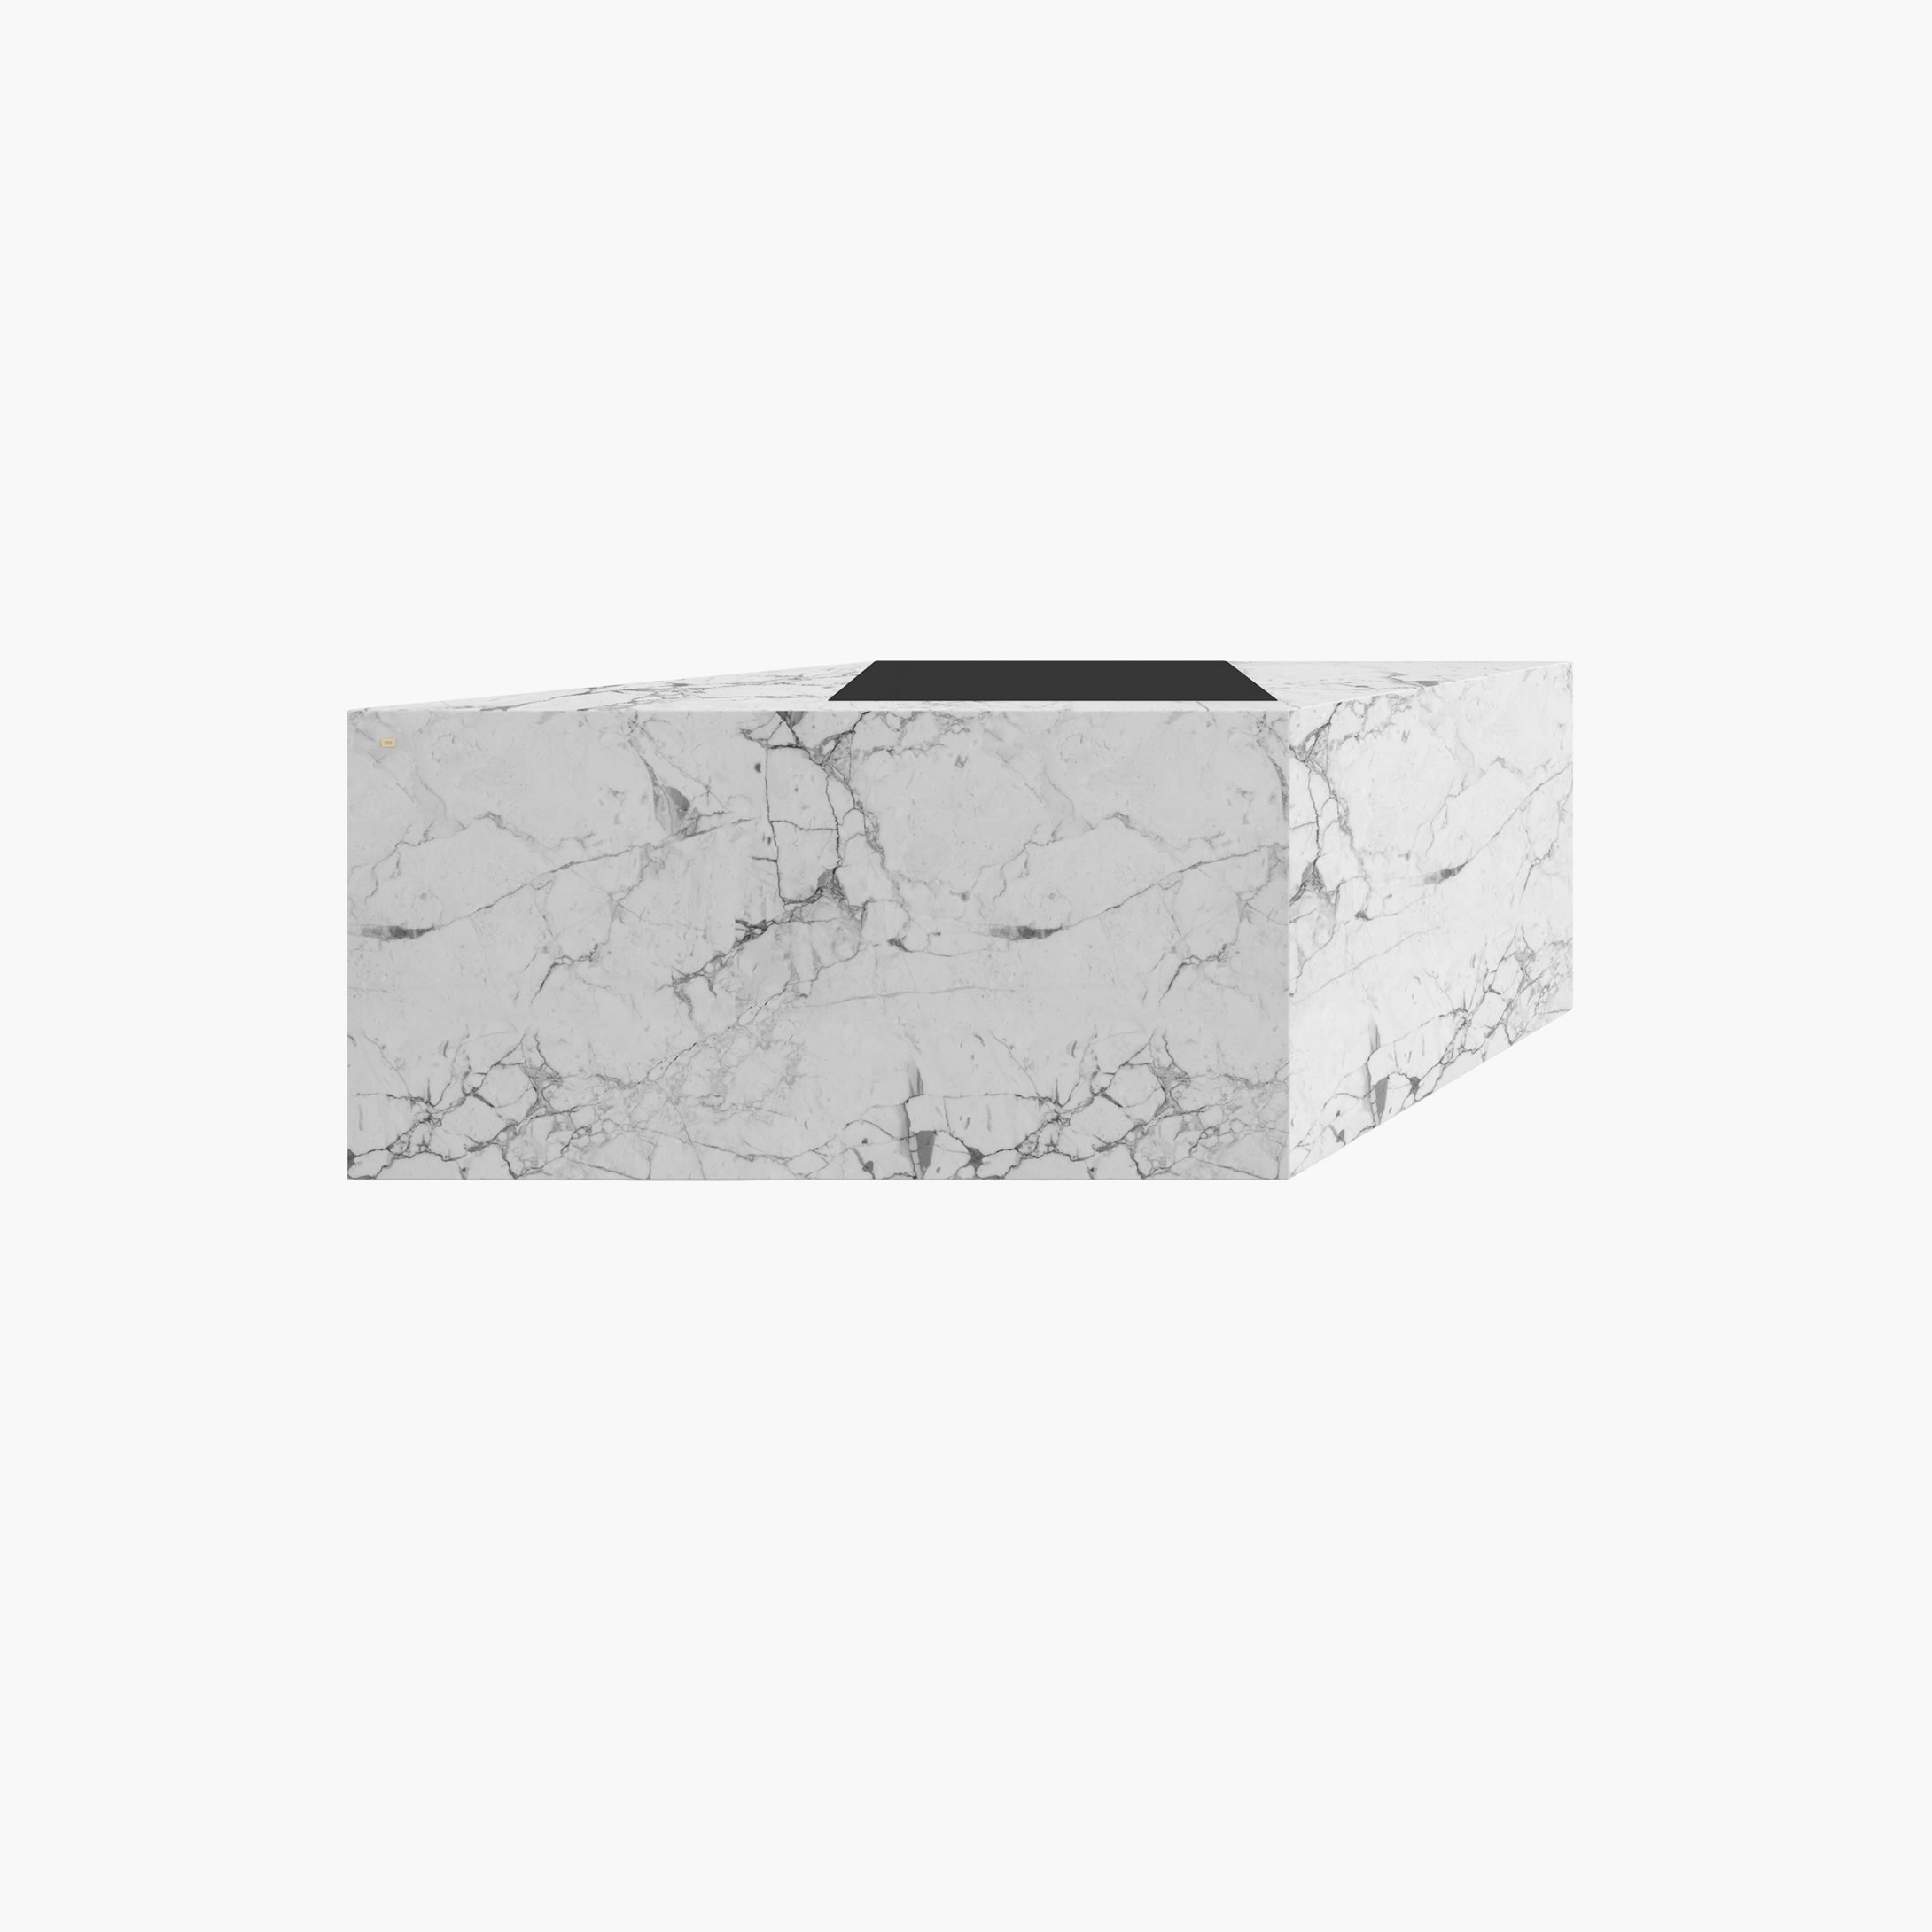 Desk small with pull out writing pads White Arabescato Marble amazing private workspace designer Desks FS 438 FELIX SCHWAKE